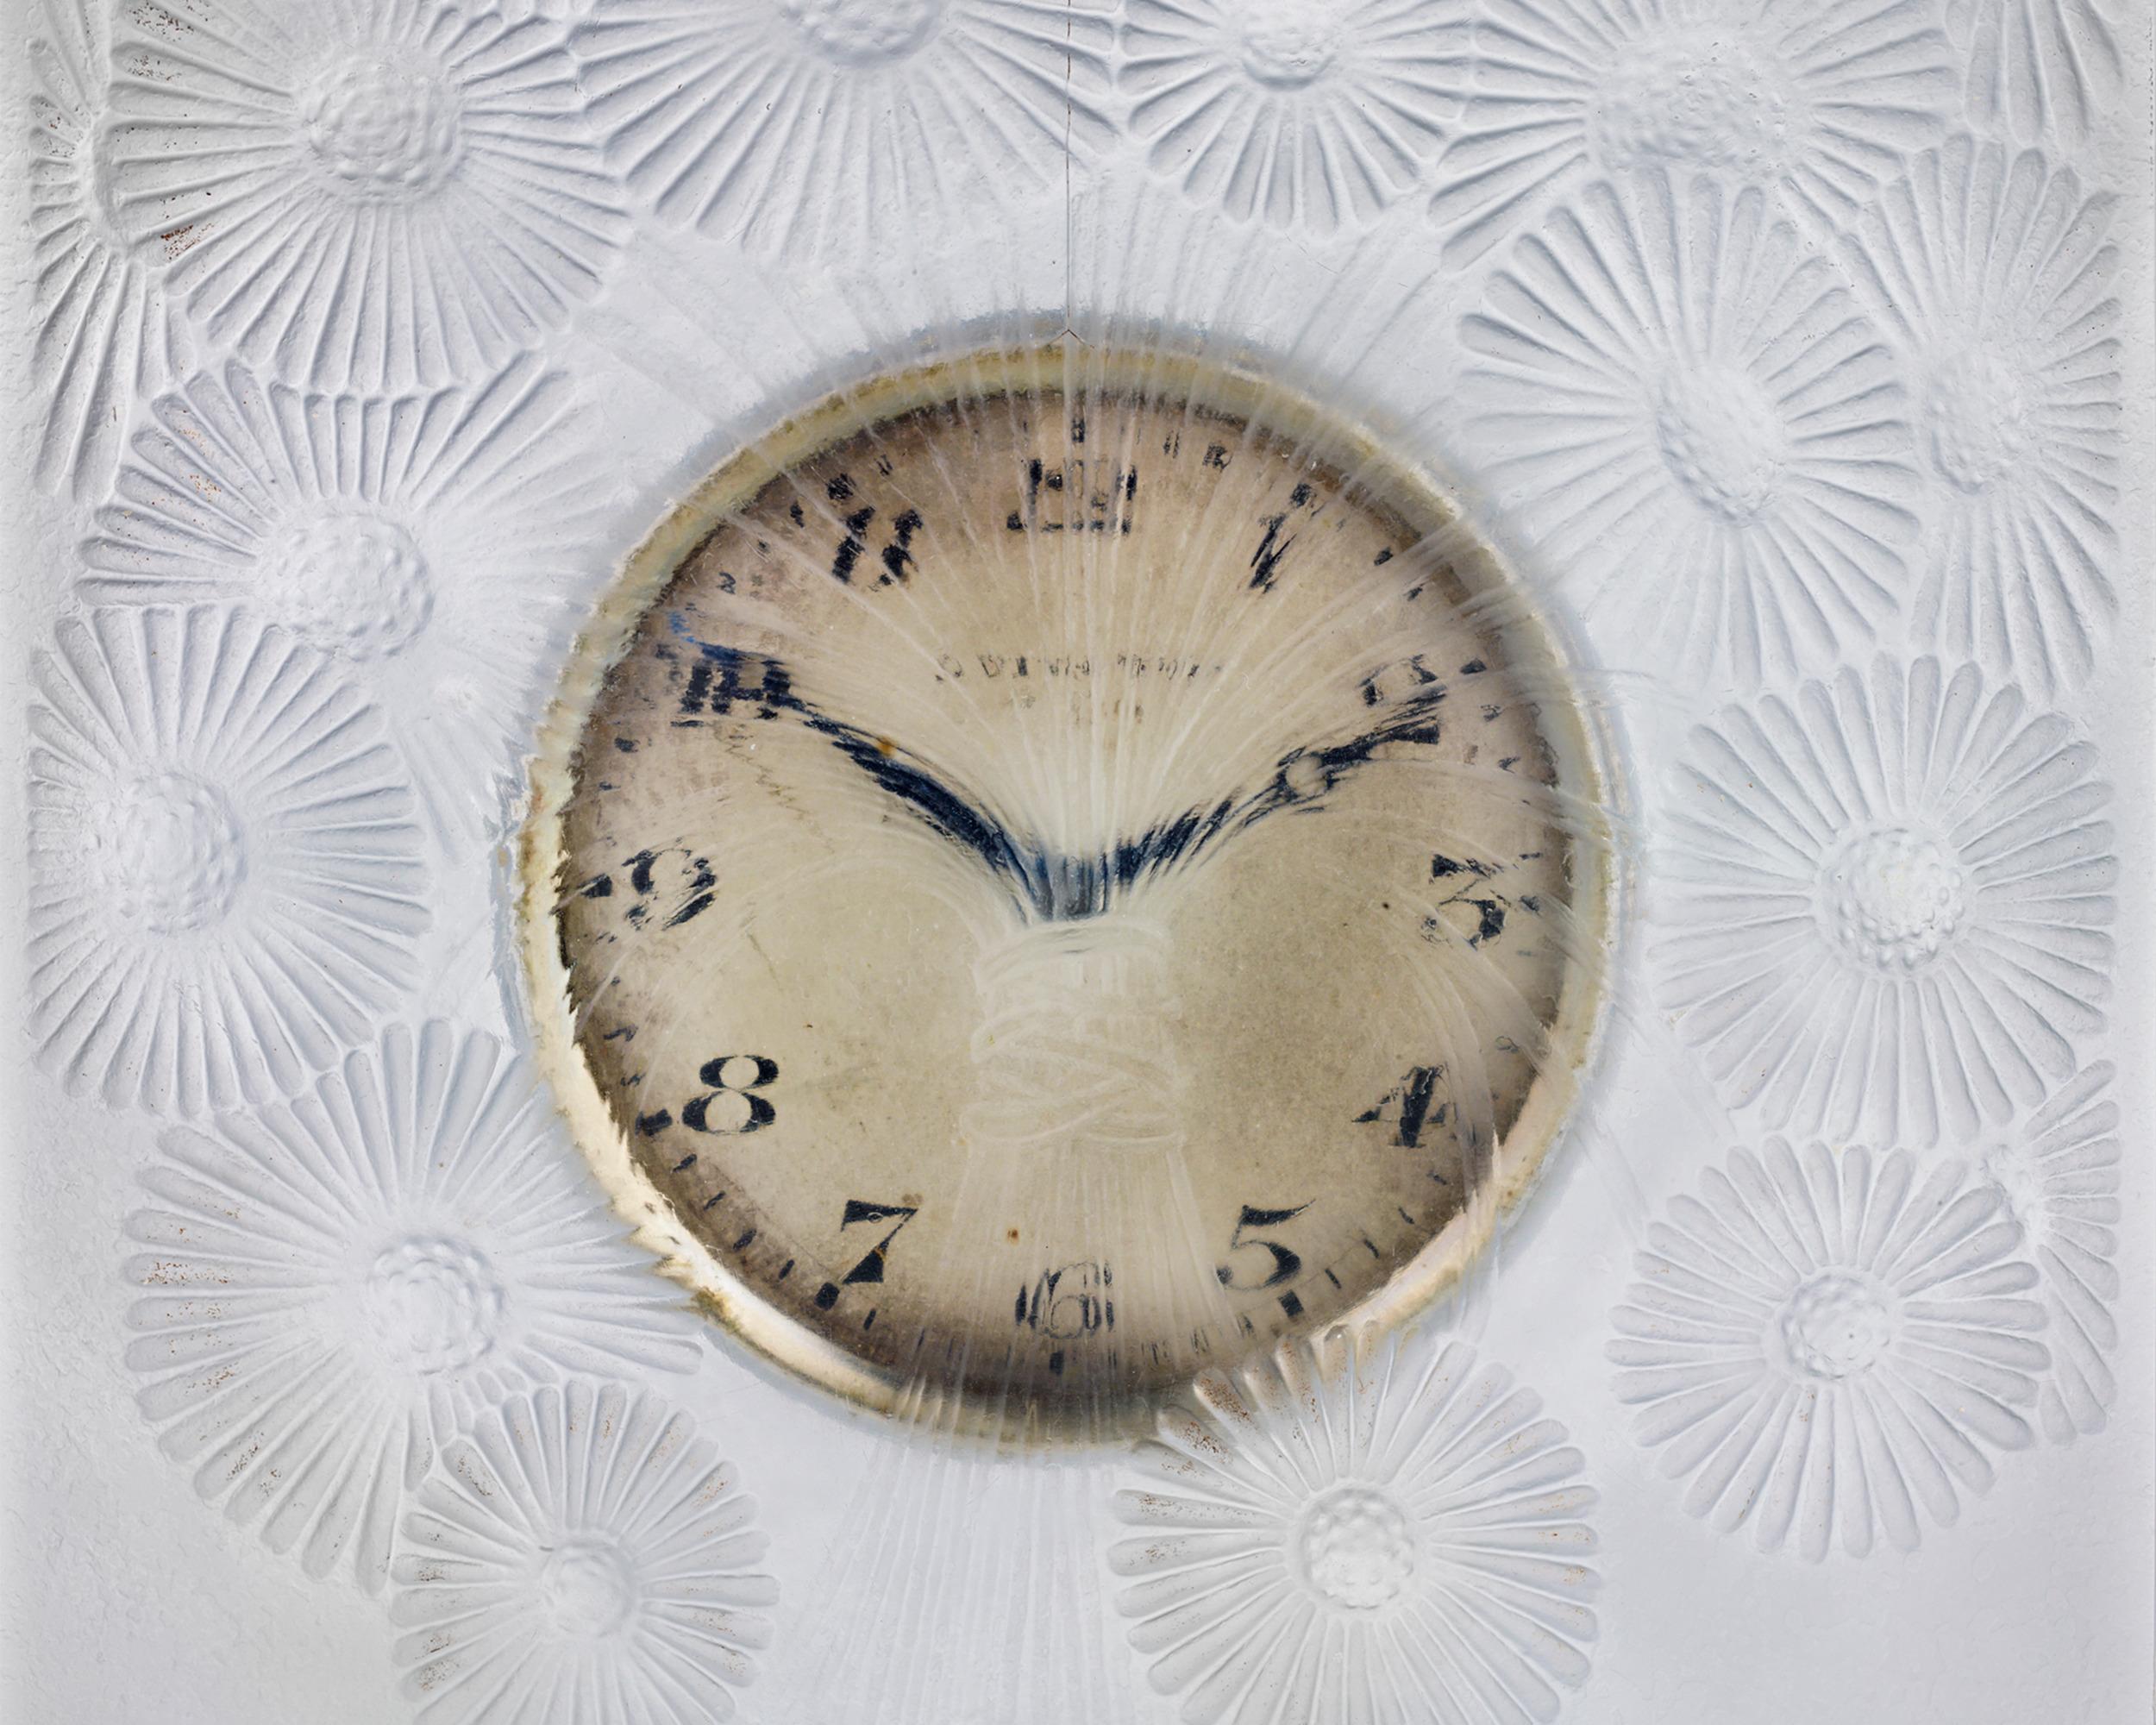 This stunning frosted glass clock by René Lalique was made circa 1920 and features the Marguerites pattern, which translates to daisy, symbolizing innocence and purity. A bouquet bursts from the center of the refined gilt clock face, with each